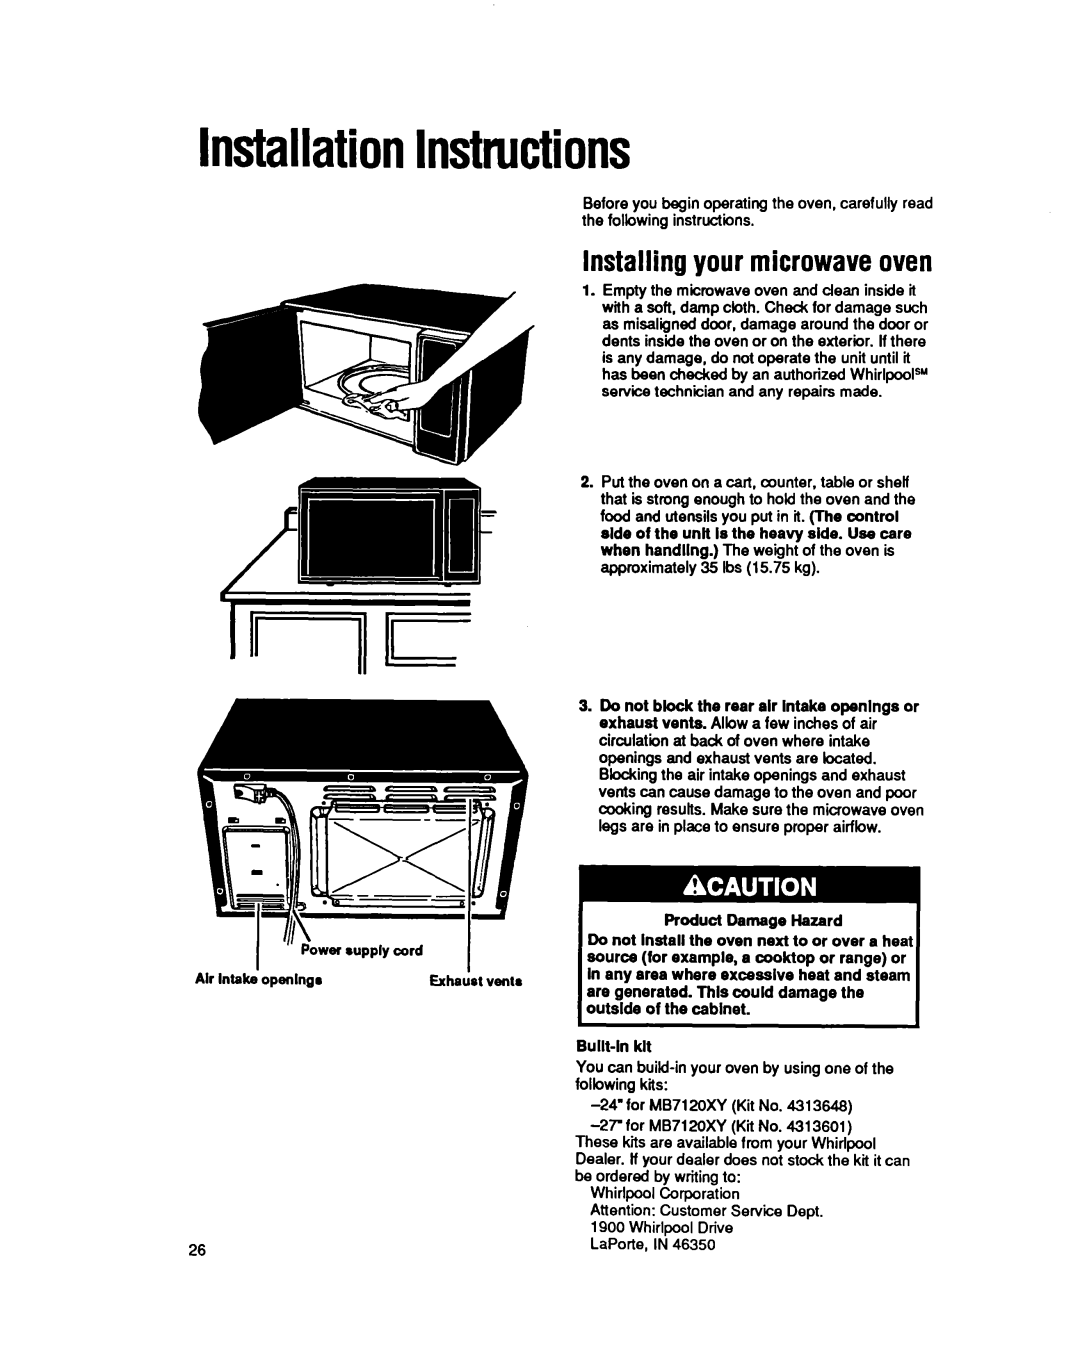 Whirlpool MB7120XY manual InstallationInstructions, Installing your microwave oven 